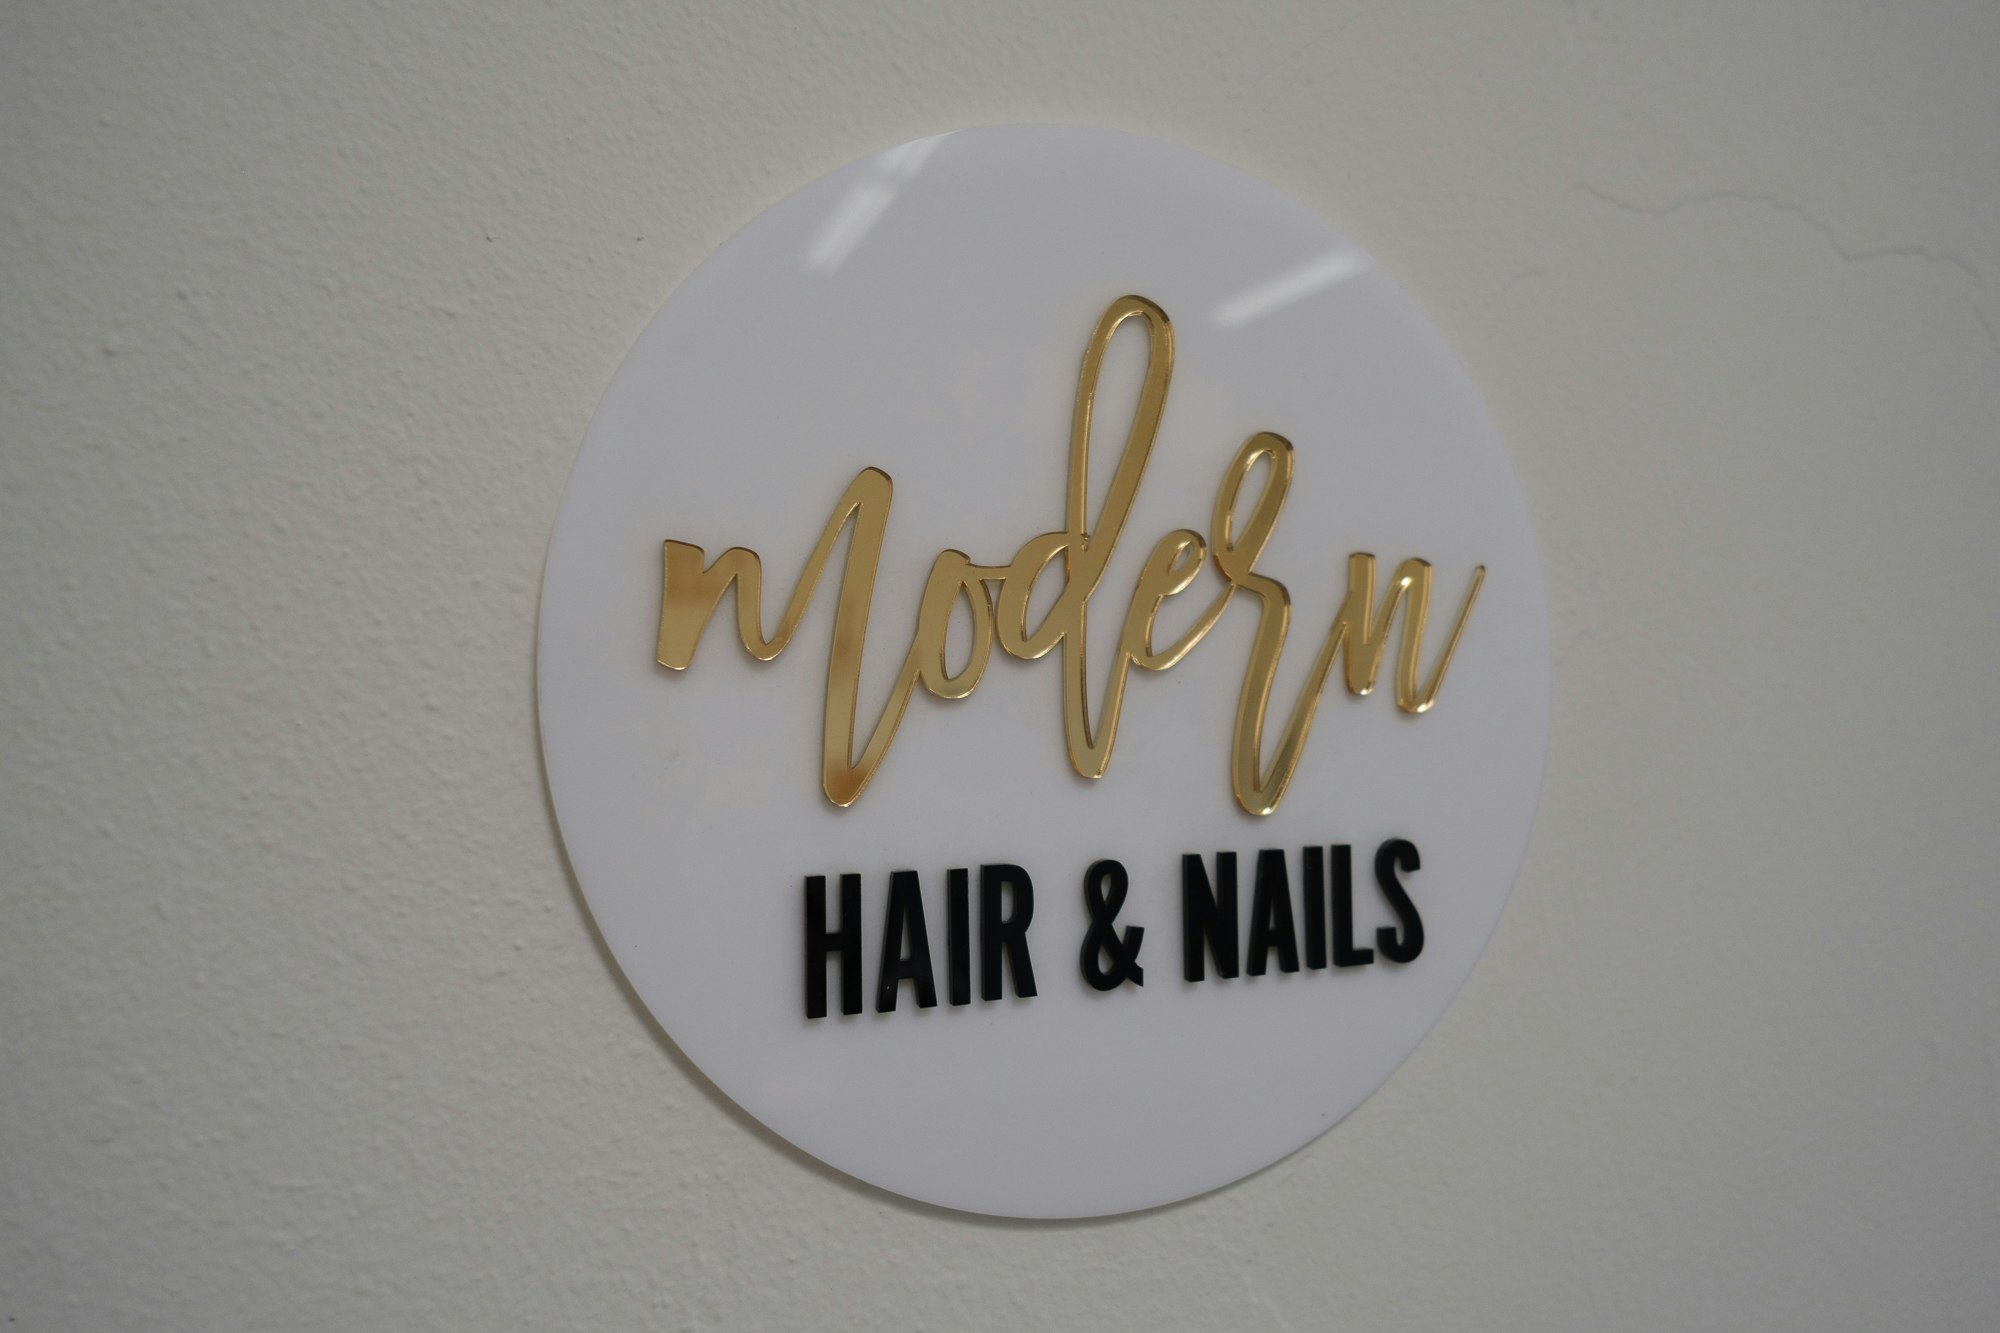 Round acrylic sign in white and gold mirro